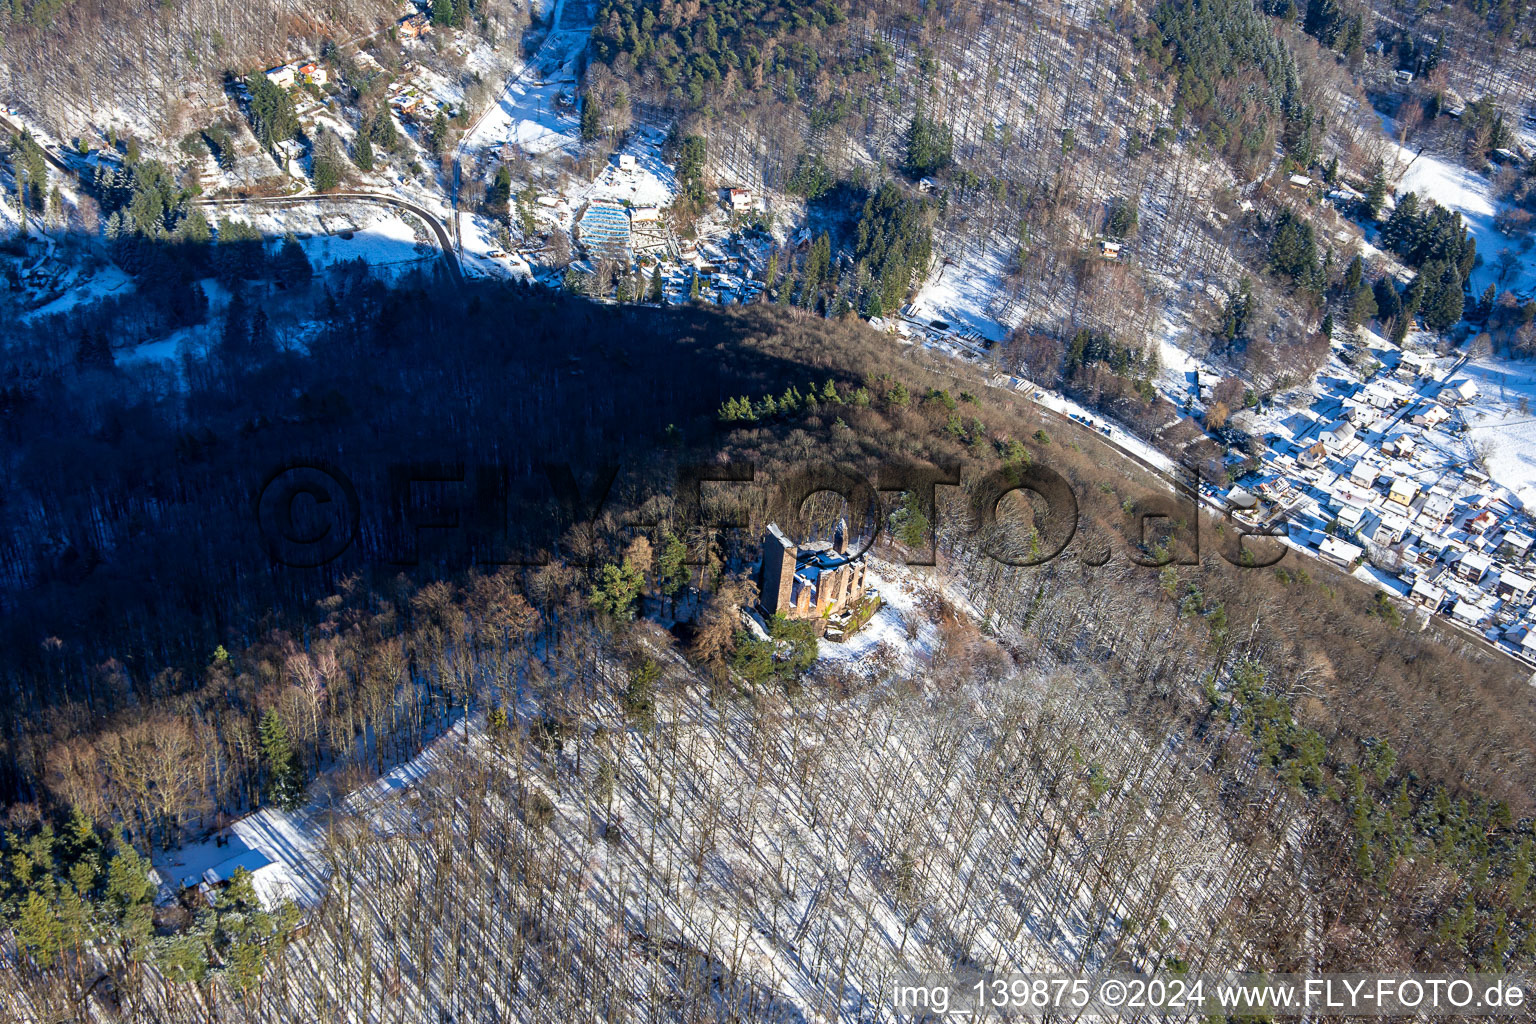 Bird's eye view of Ramburg castle ruins in winter with snow in Ramberg in the state Rhineland-Palatinate, Germany